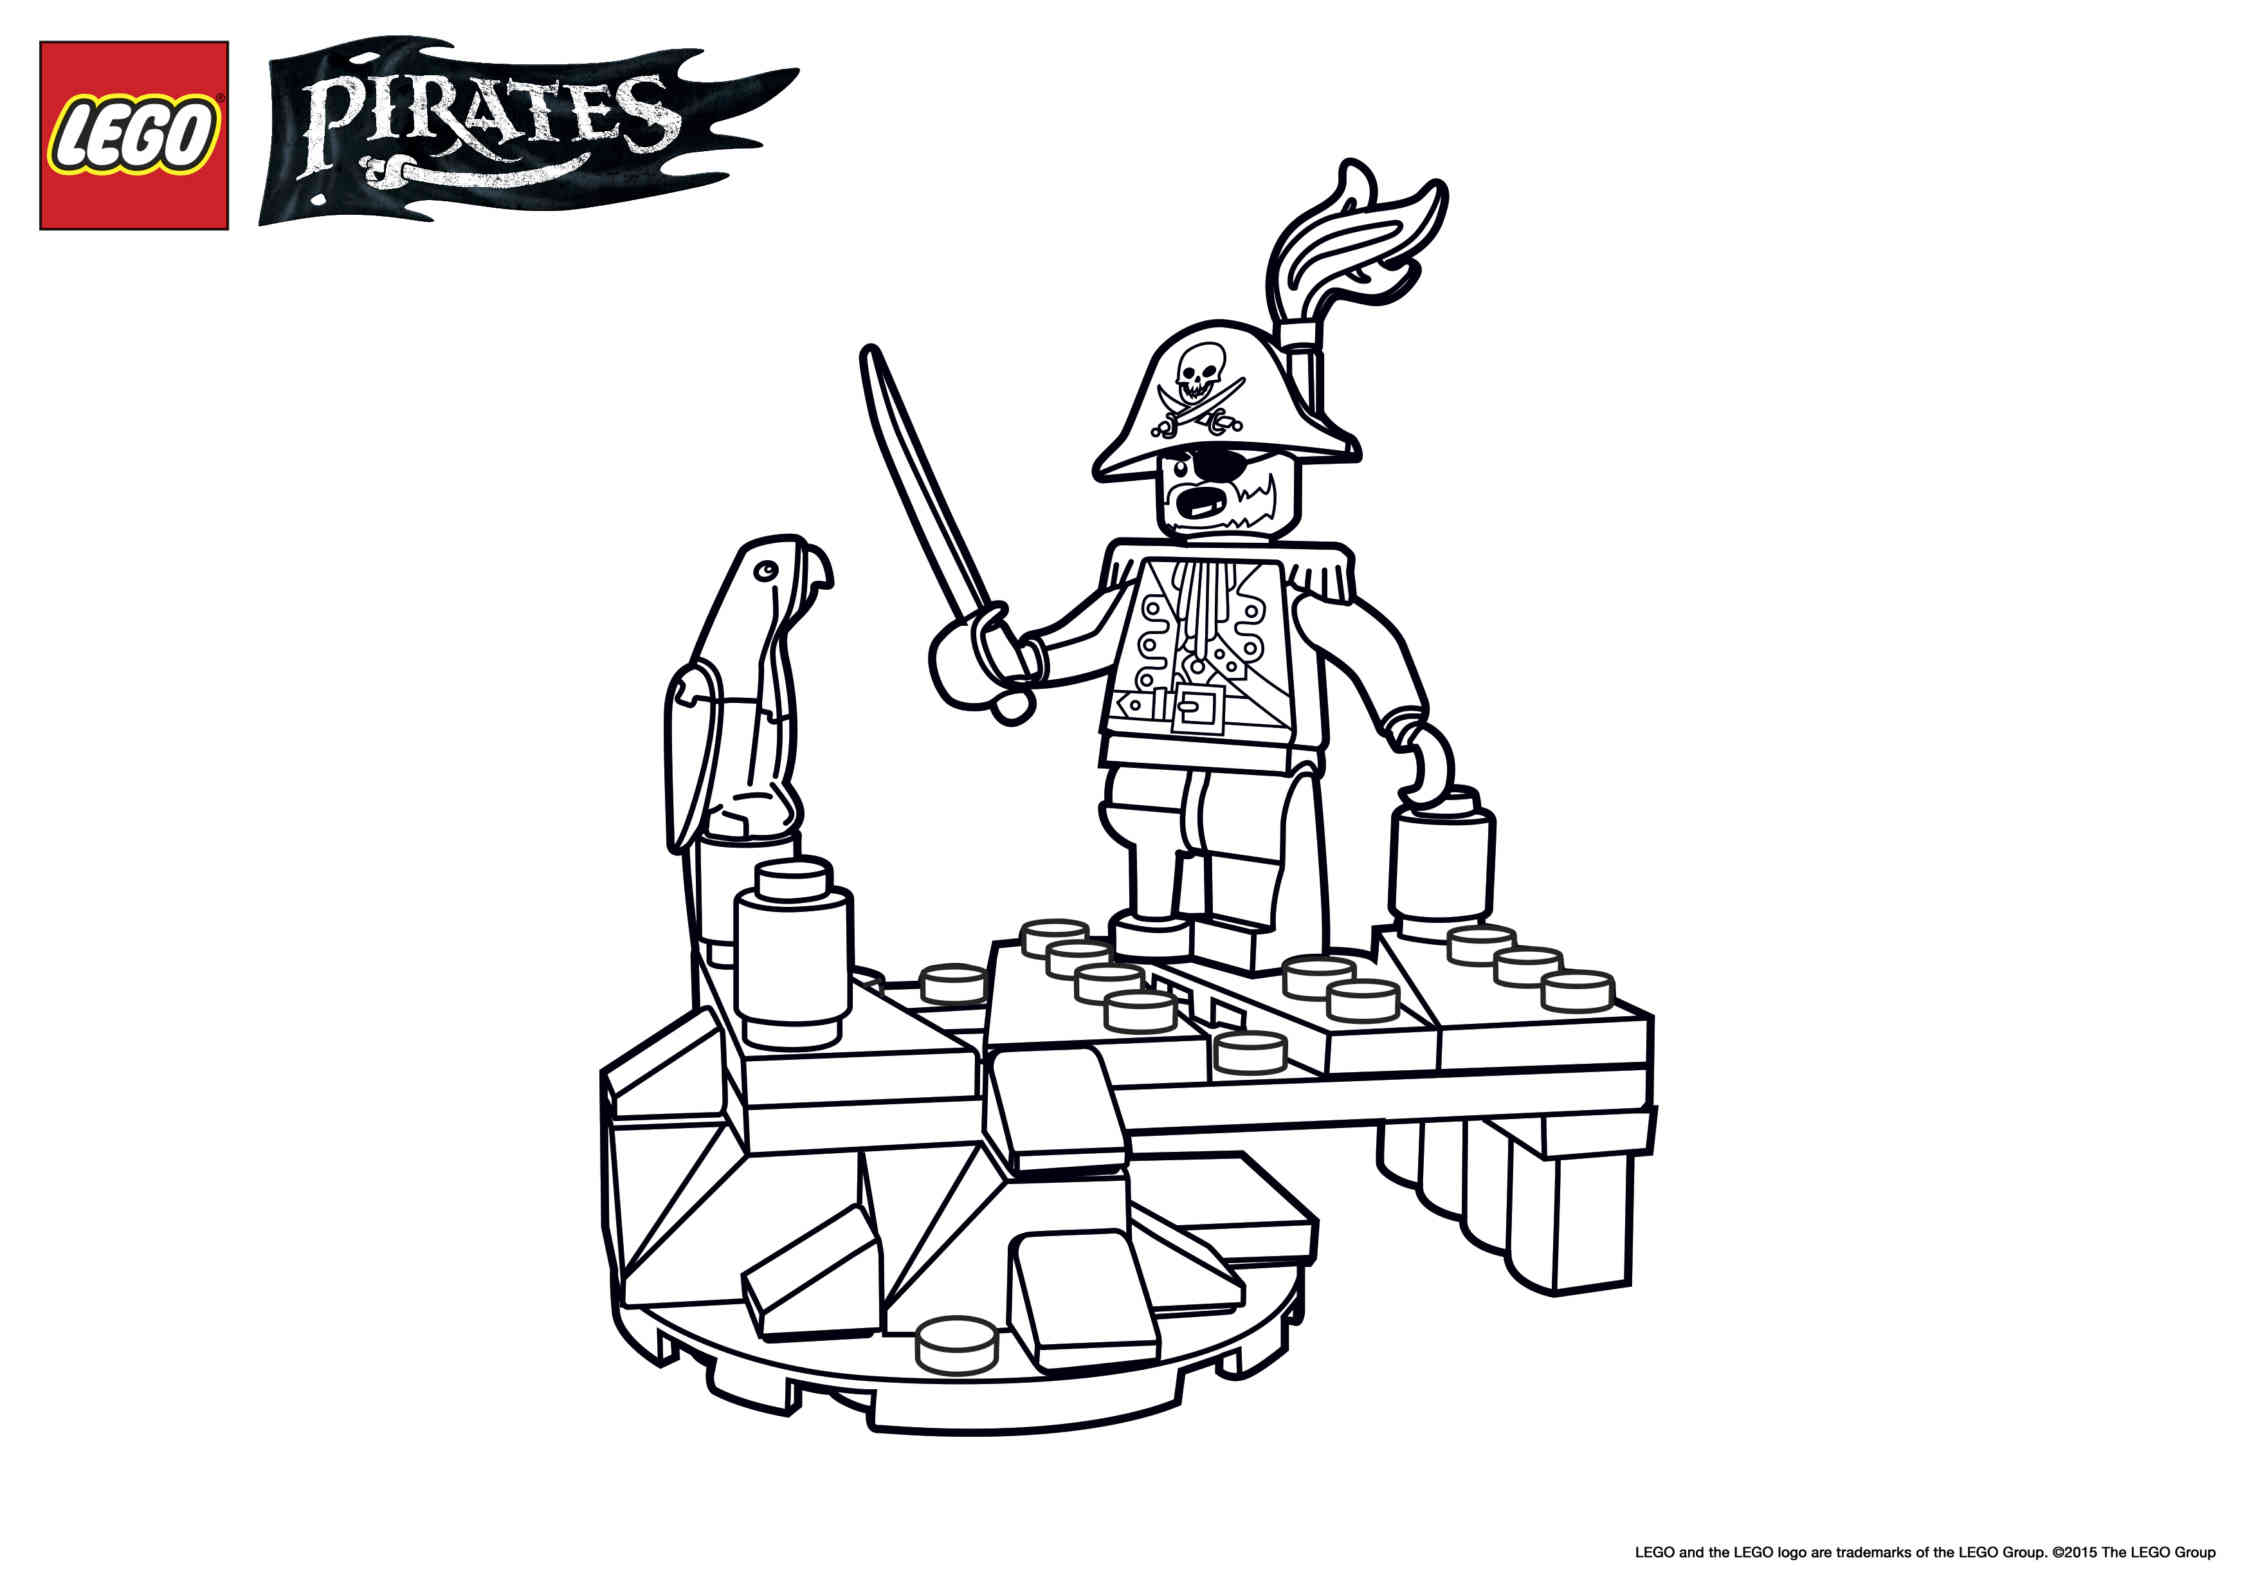 Pirate and Parrot Coloring Page - Wallpaper - Activities - LEGO ...